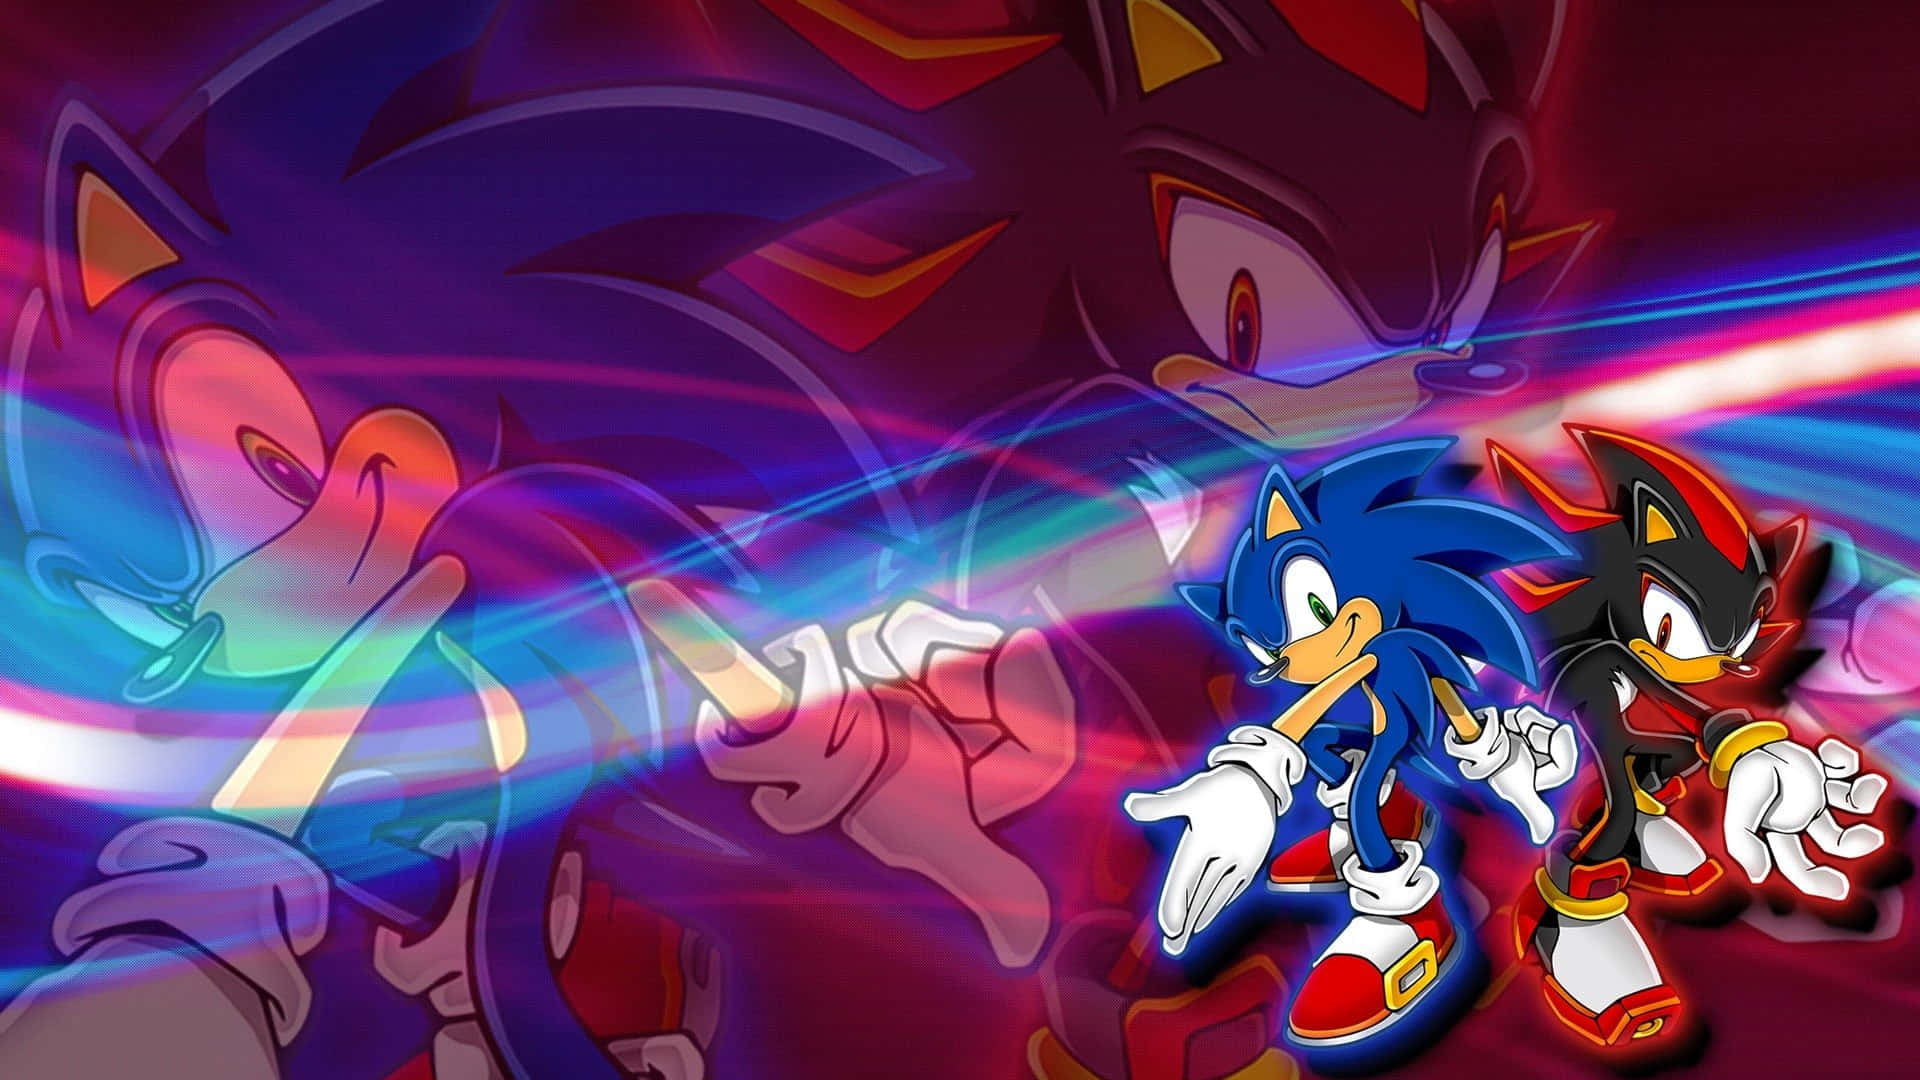 Sonic and friends in an action-packed adventure in Sonic Adventure HD Wallpaper